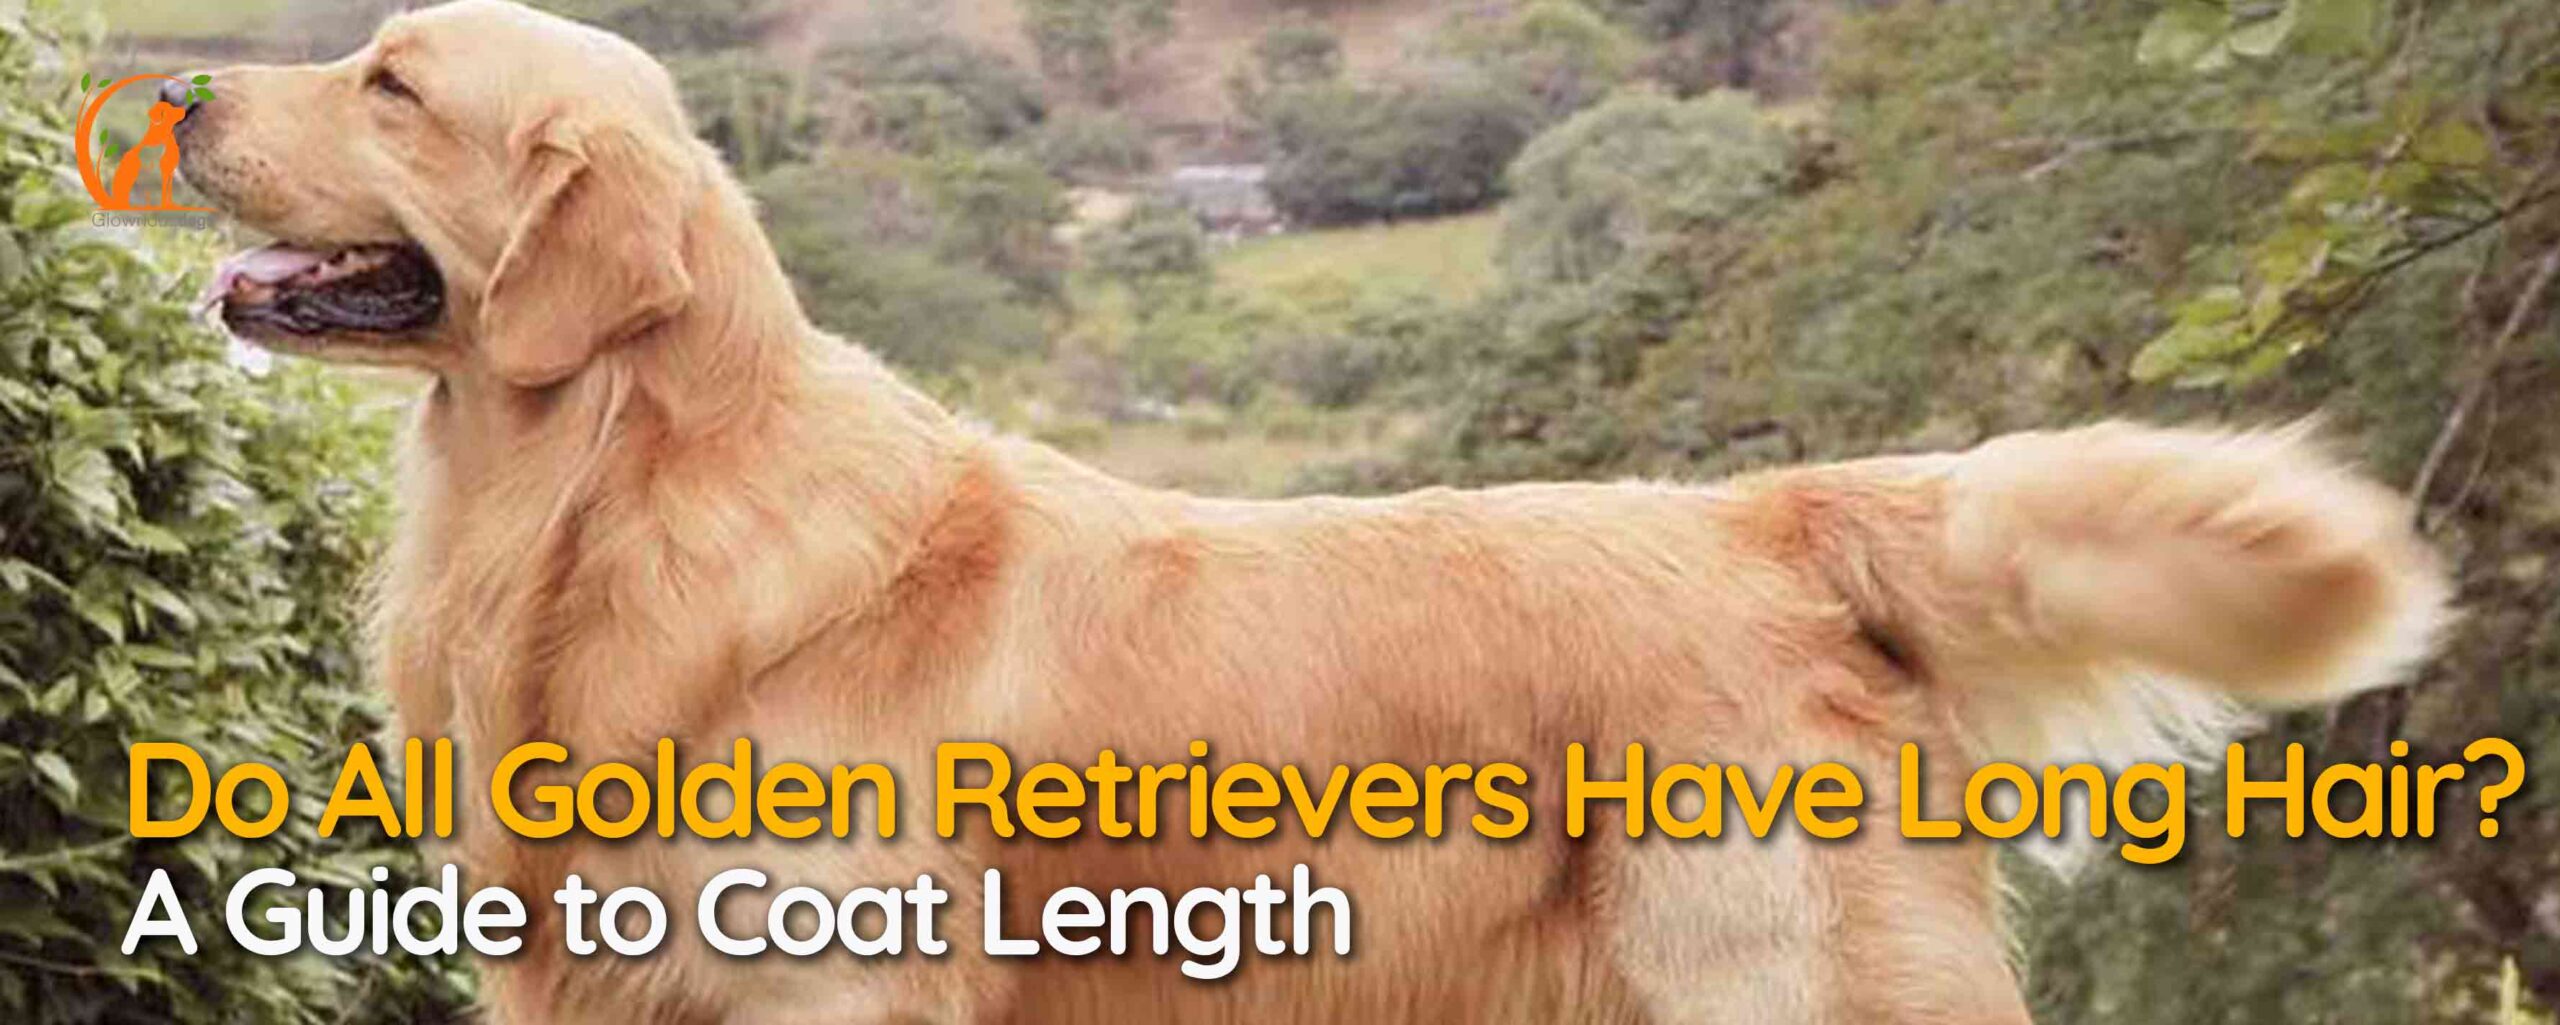 Do All Golden Retrievers Have Long Hair? A Guide to Coat Length